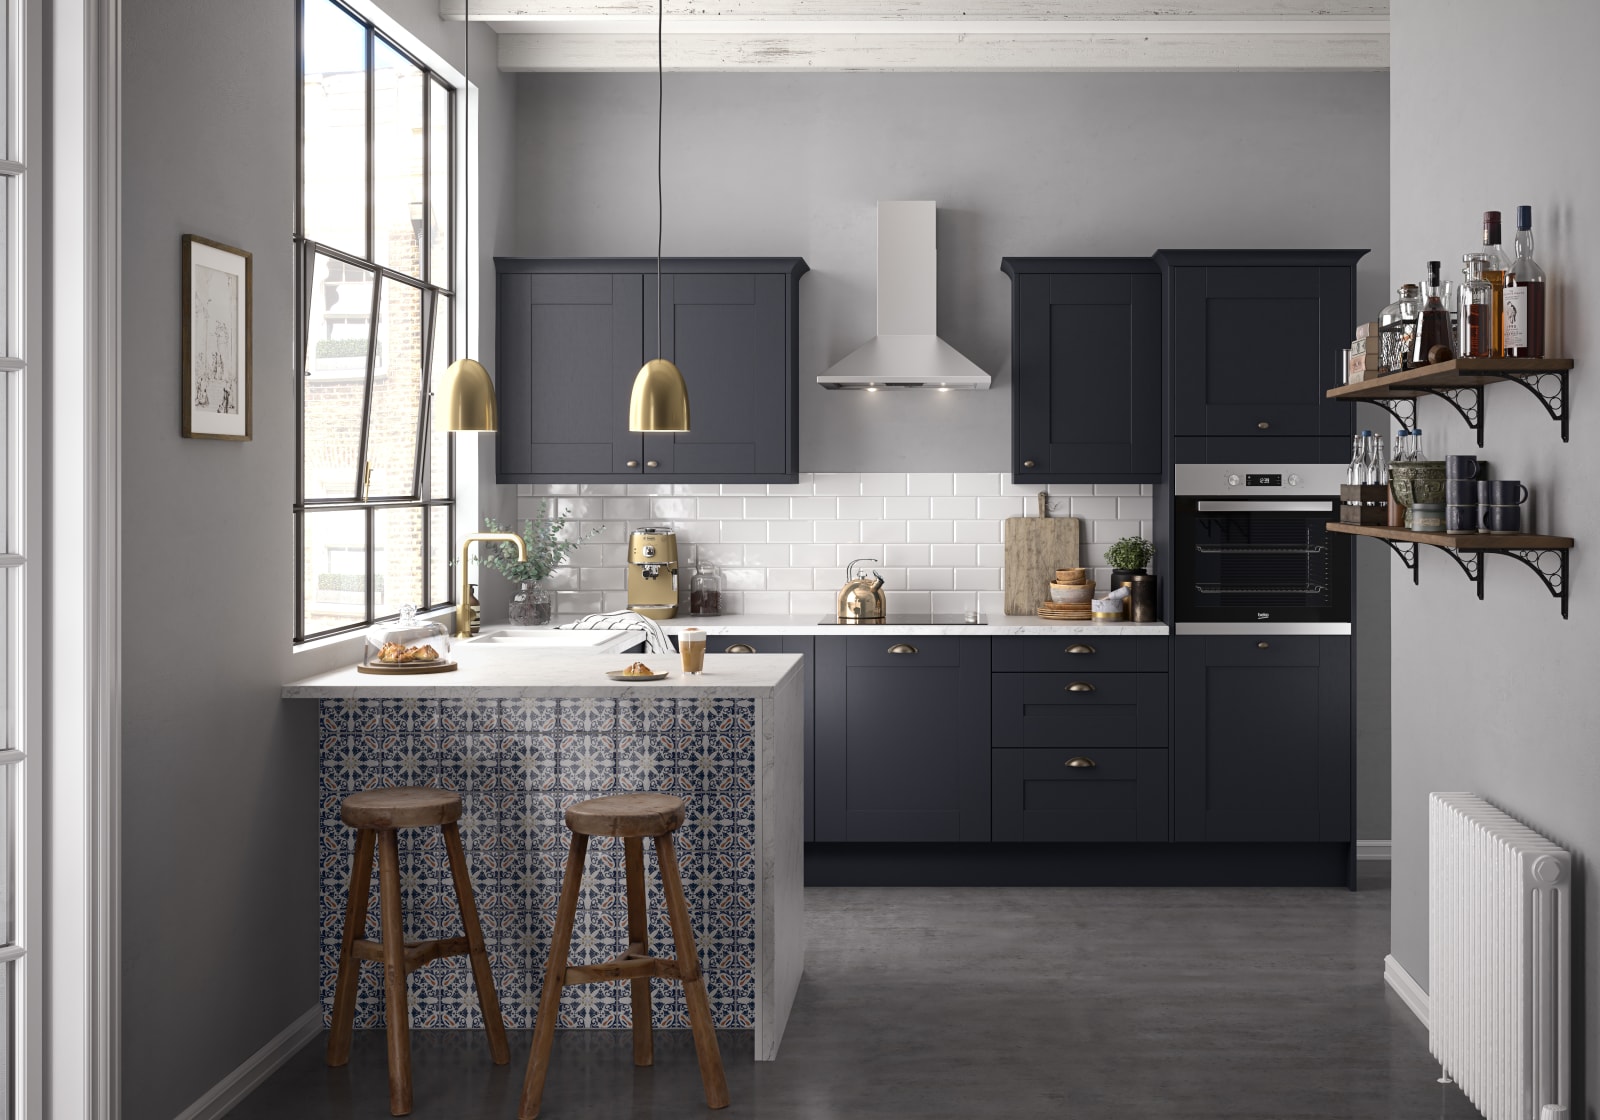 Winchester kitchen by Magnet. A wood grain effect affordable alternative to solid timber built from hardwearing MDF and available in 5 colours.